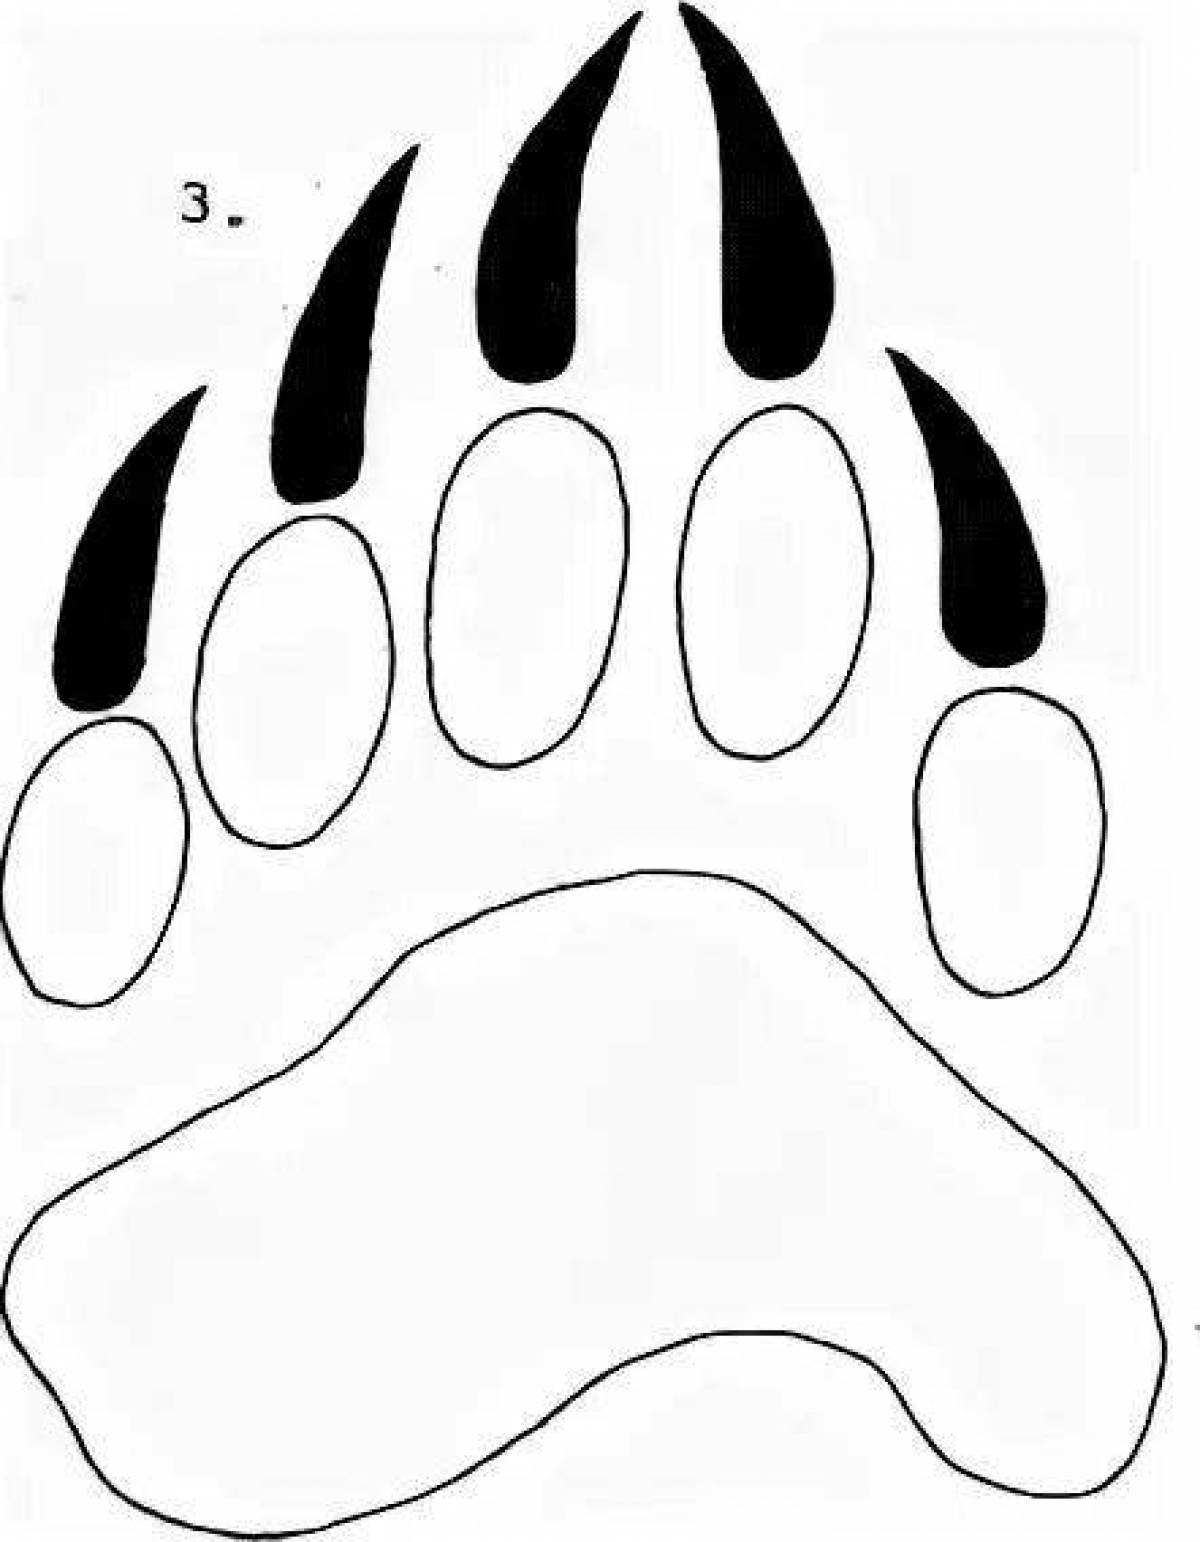 Coloring book footprints of wild animals